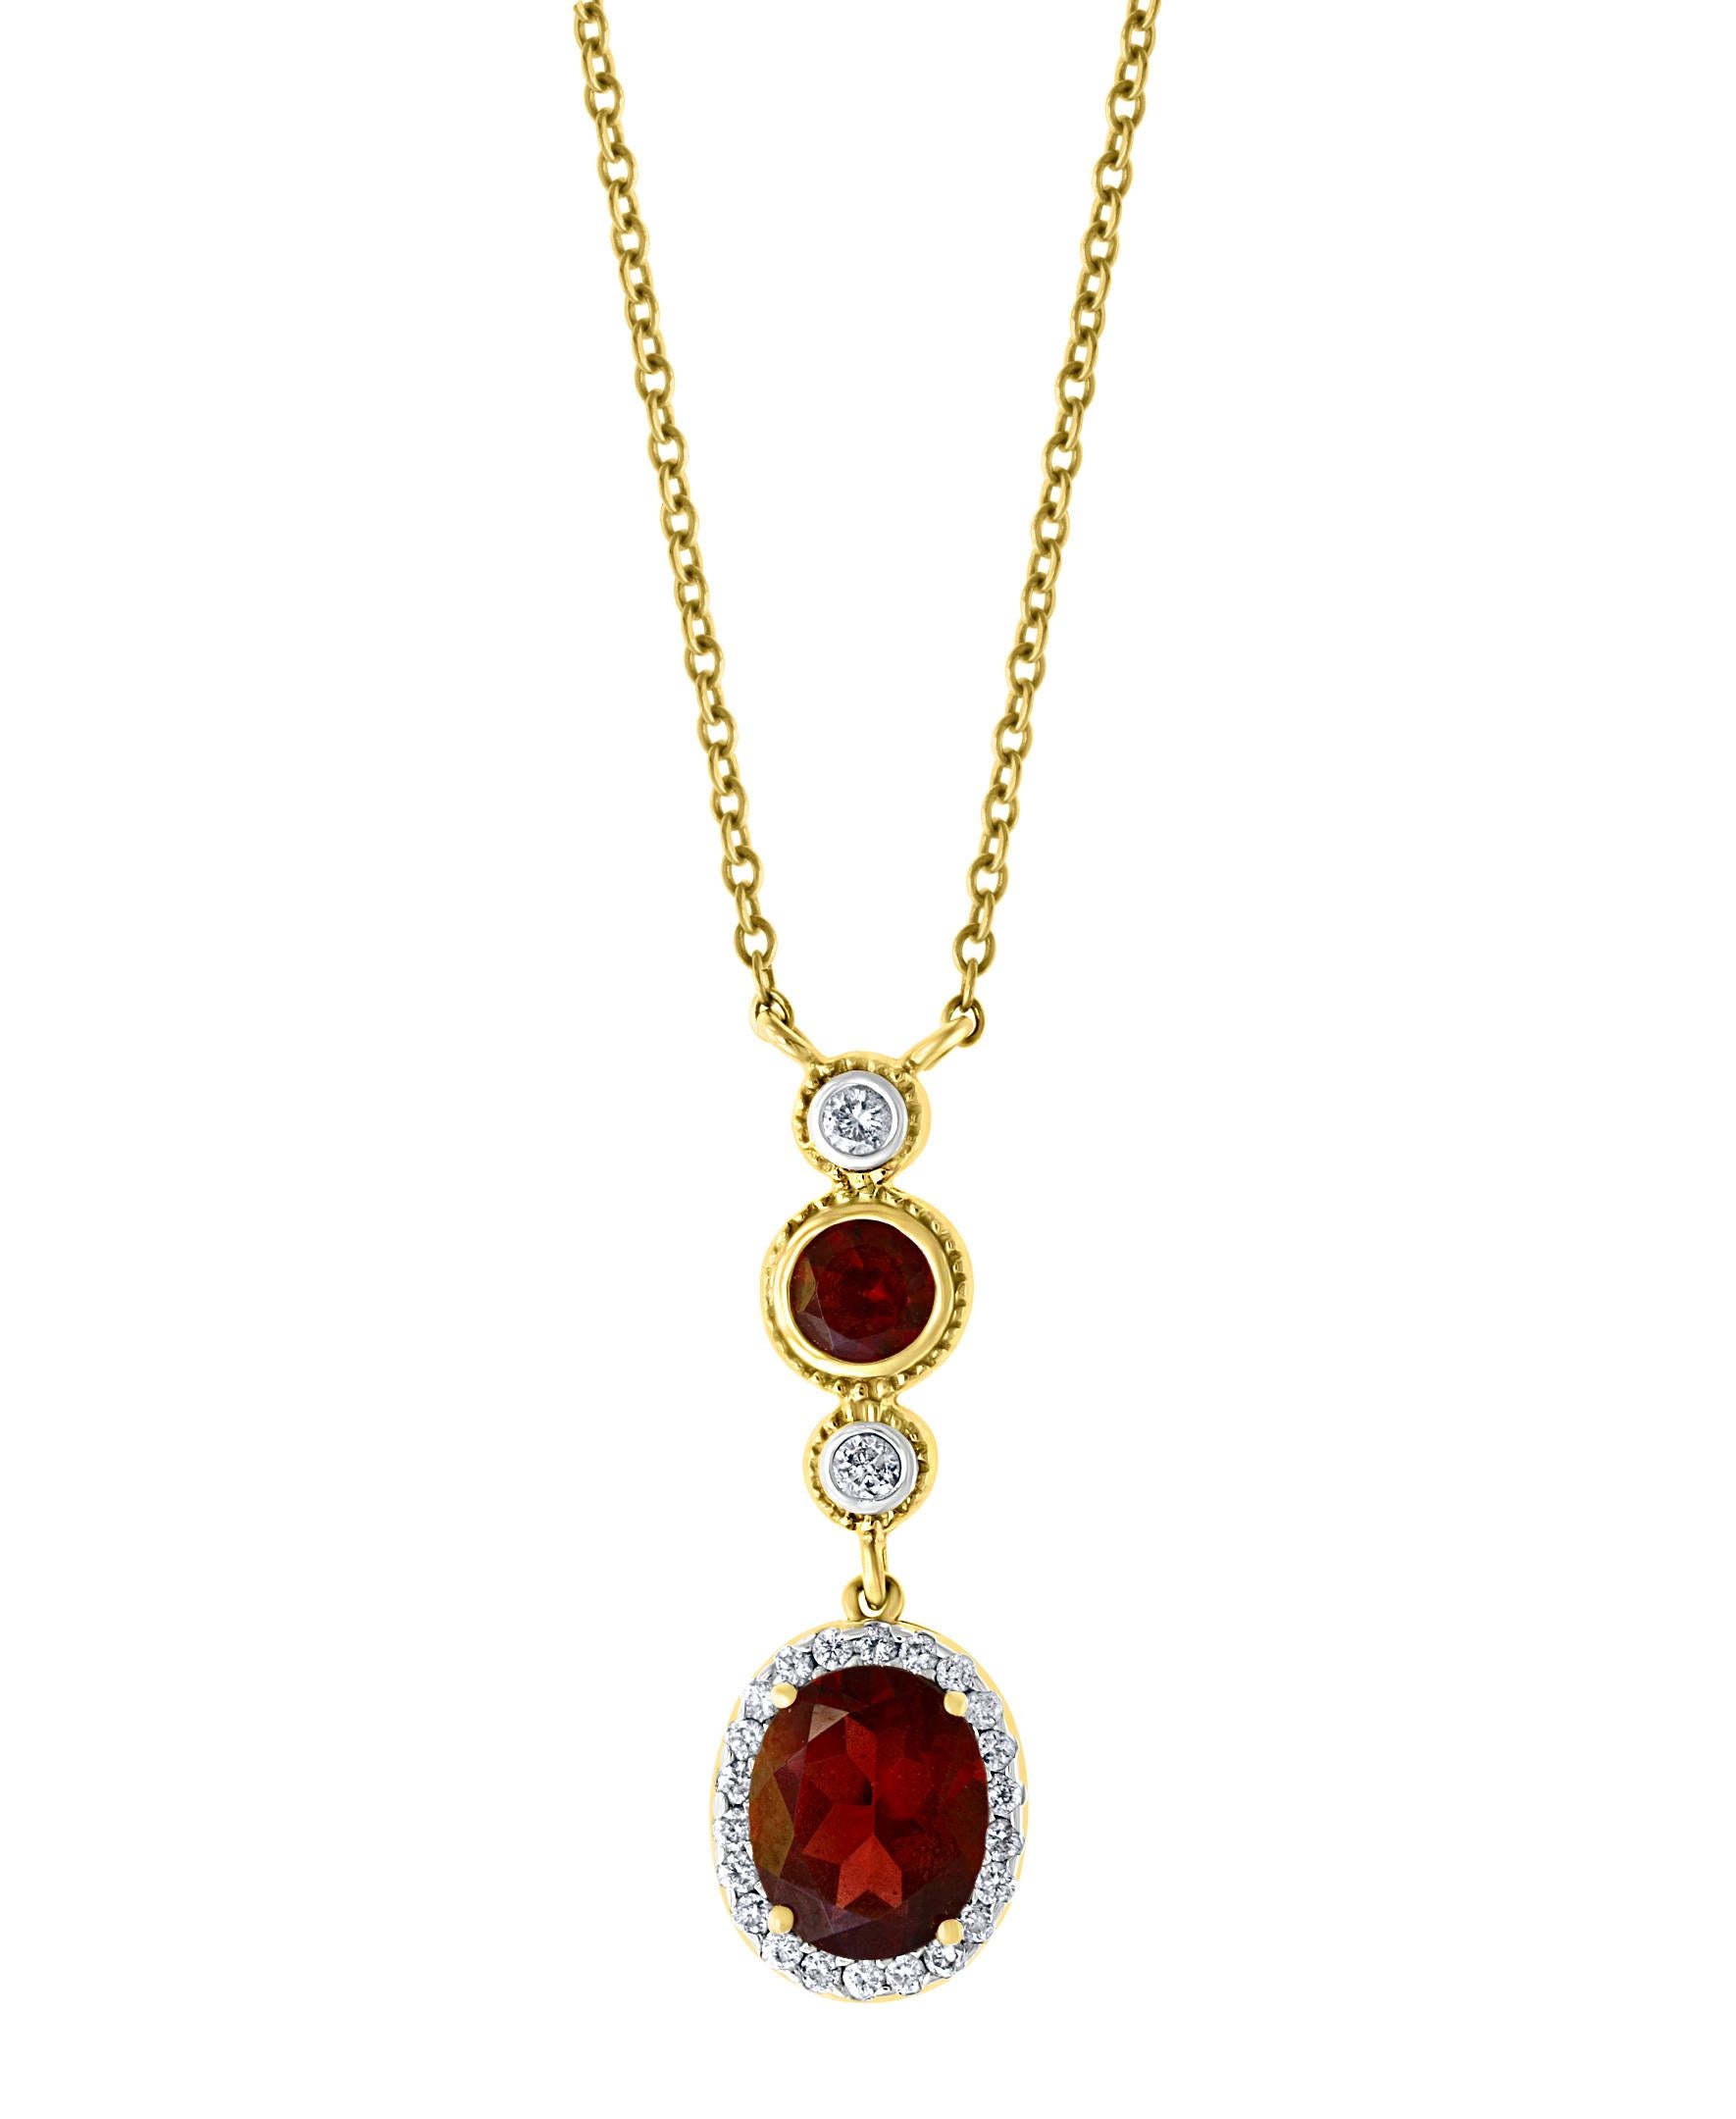 6 Carat Oval Shape Garnet and 0.6 Carat Diamond Necklace in 14 Karat Yellow Gold For Sale 6